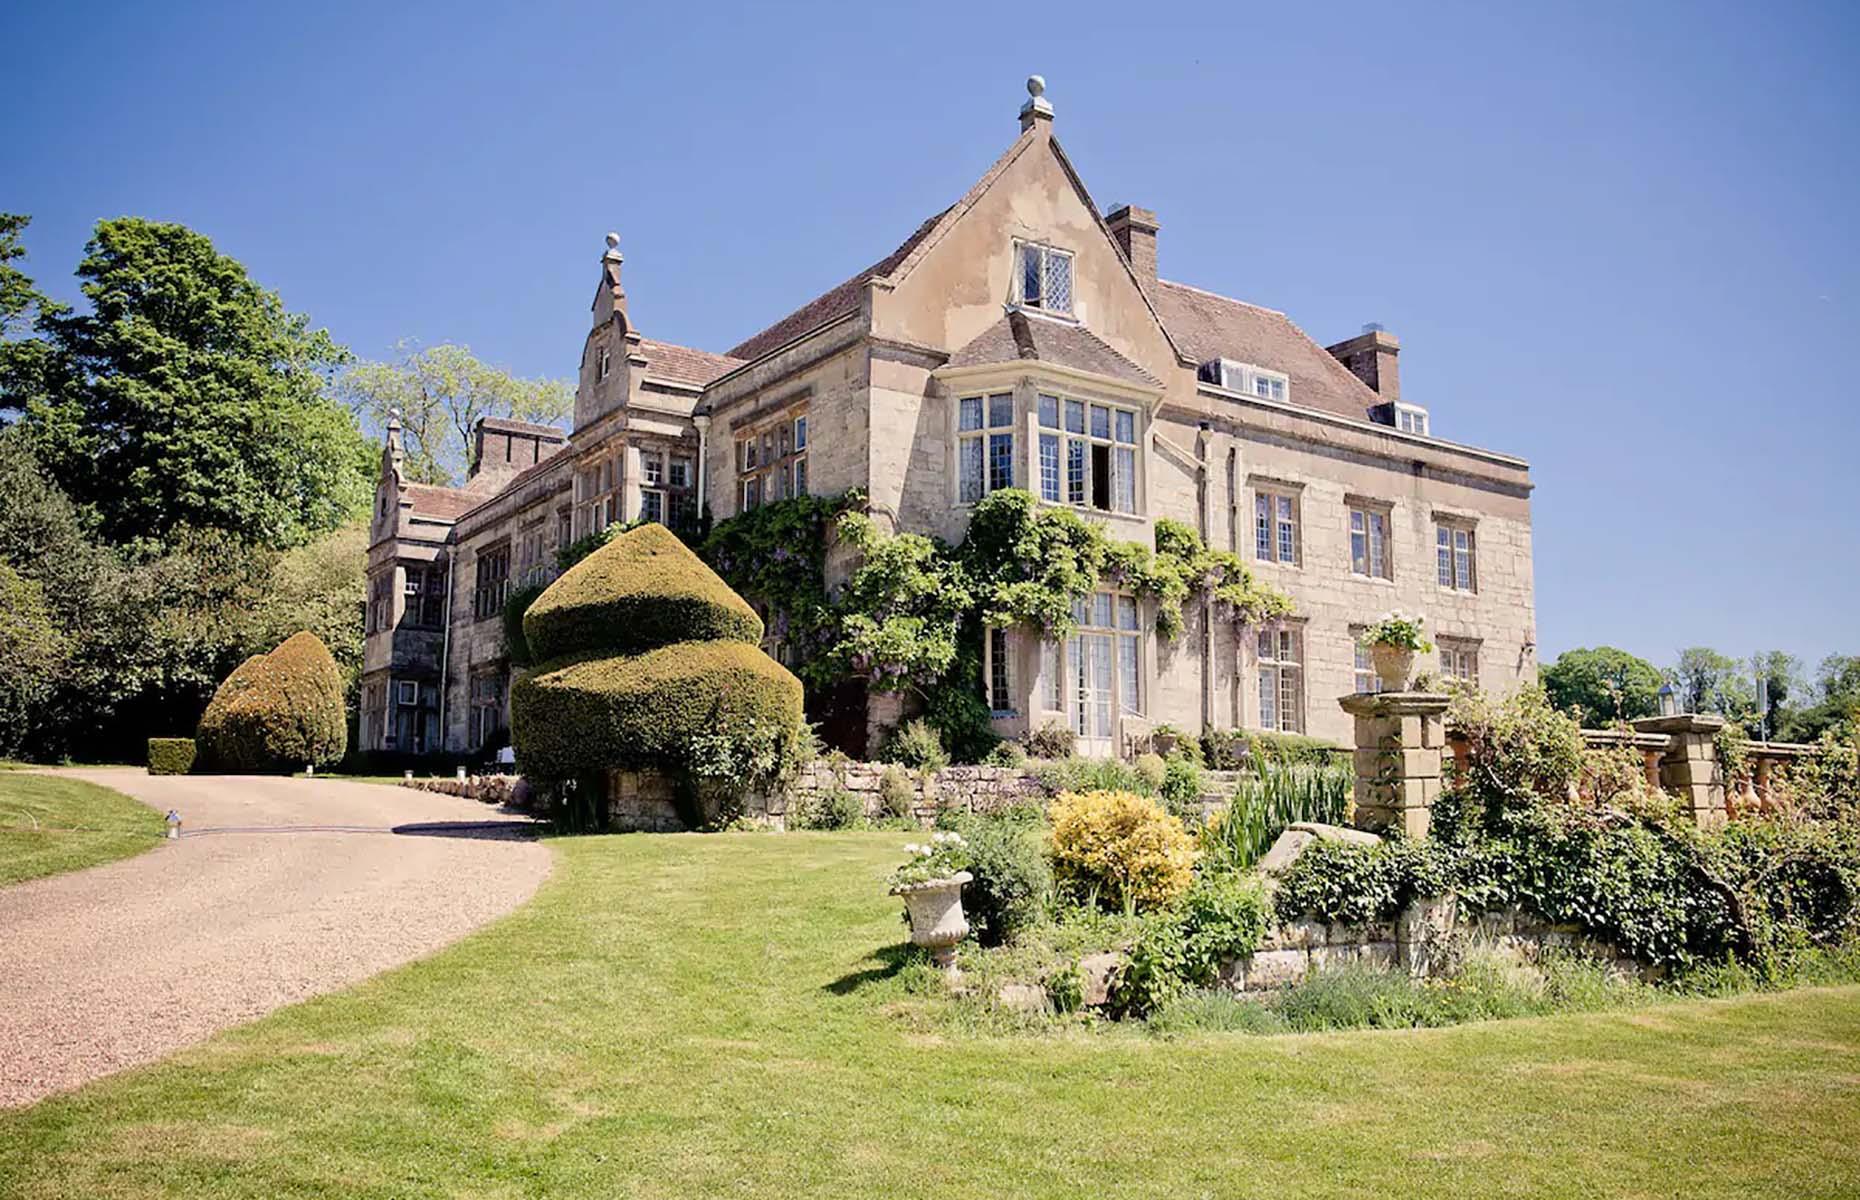 <p>Guests can feel like royalty at <a href="https://www.airbnb.co.uk/rooms/17247743">this Jacobean Grade I-listed building</a> in East Sussex that's been improved with a swimming pool and a tennis court. There are seven themed bedrooms to choose from, plus two acres of formal gardens and a 100-acre park surrounding the stunning country house to enjoy. Inside, the exquisitely decorated rooms bring a feeling of old-style grandeur while the kitchen has been modernized to suit any occasion.</p>